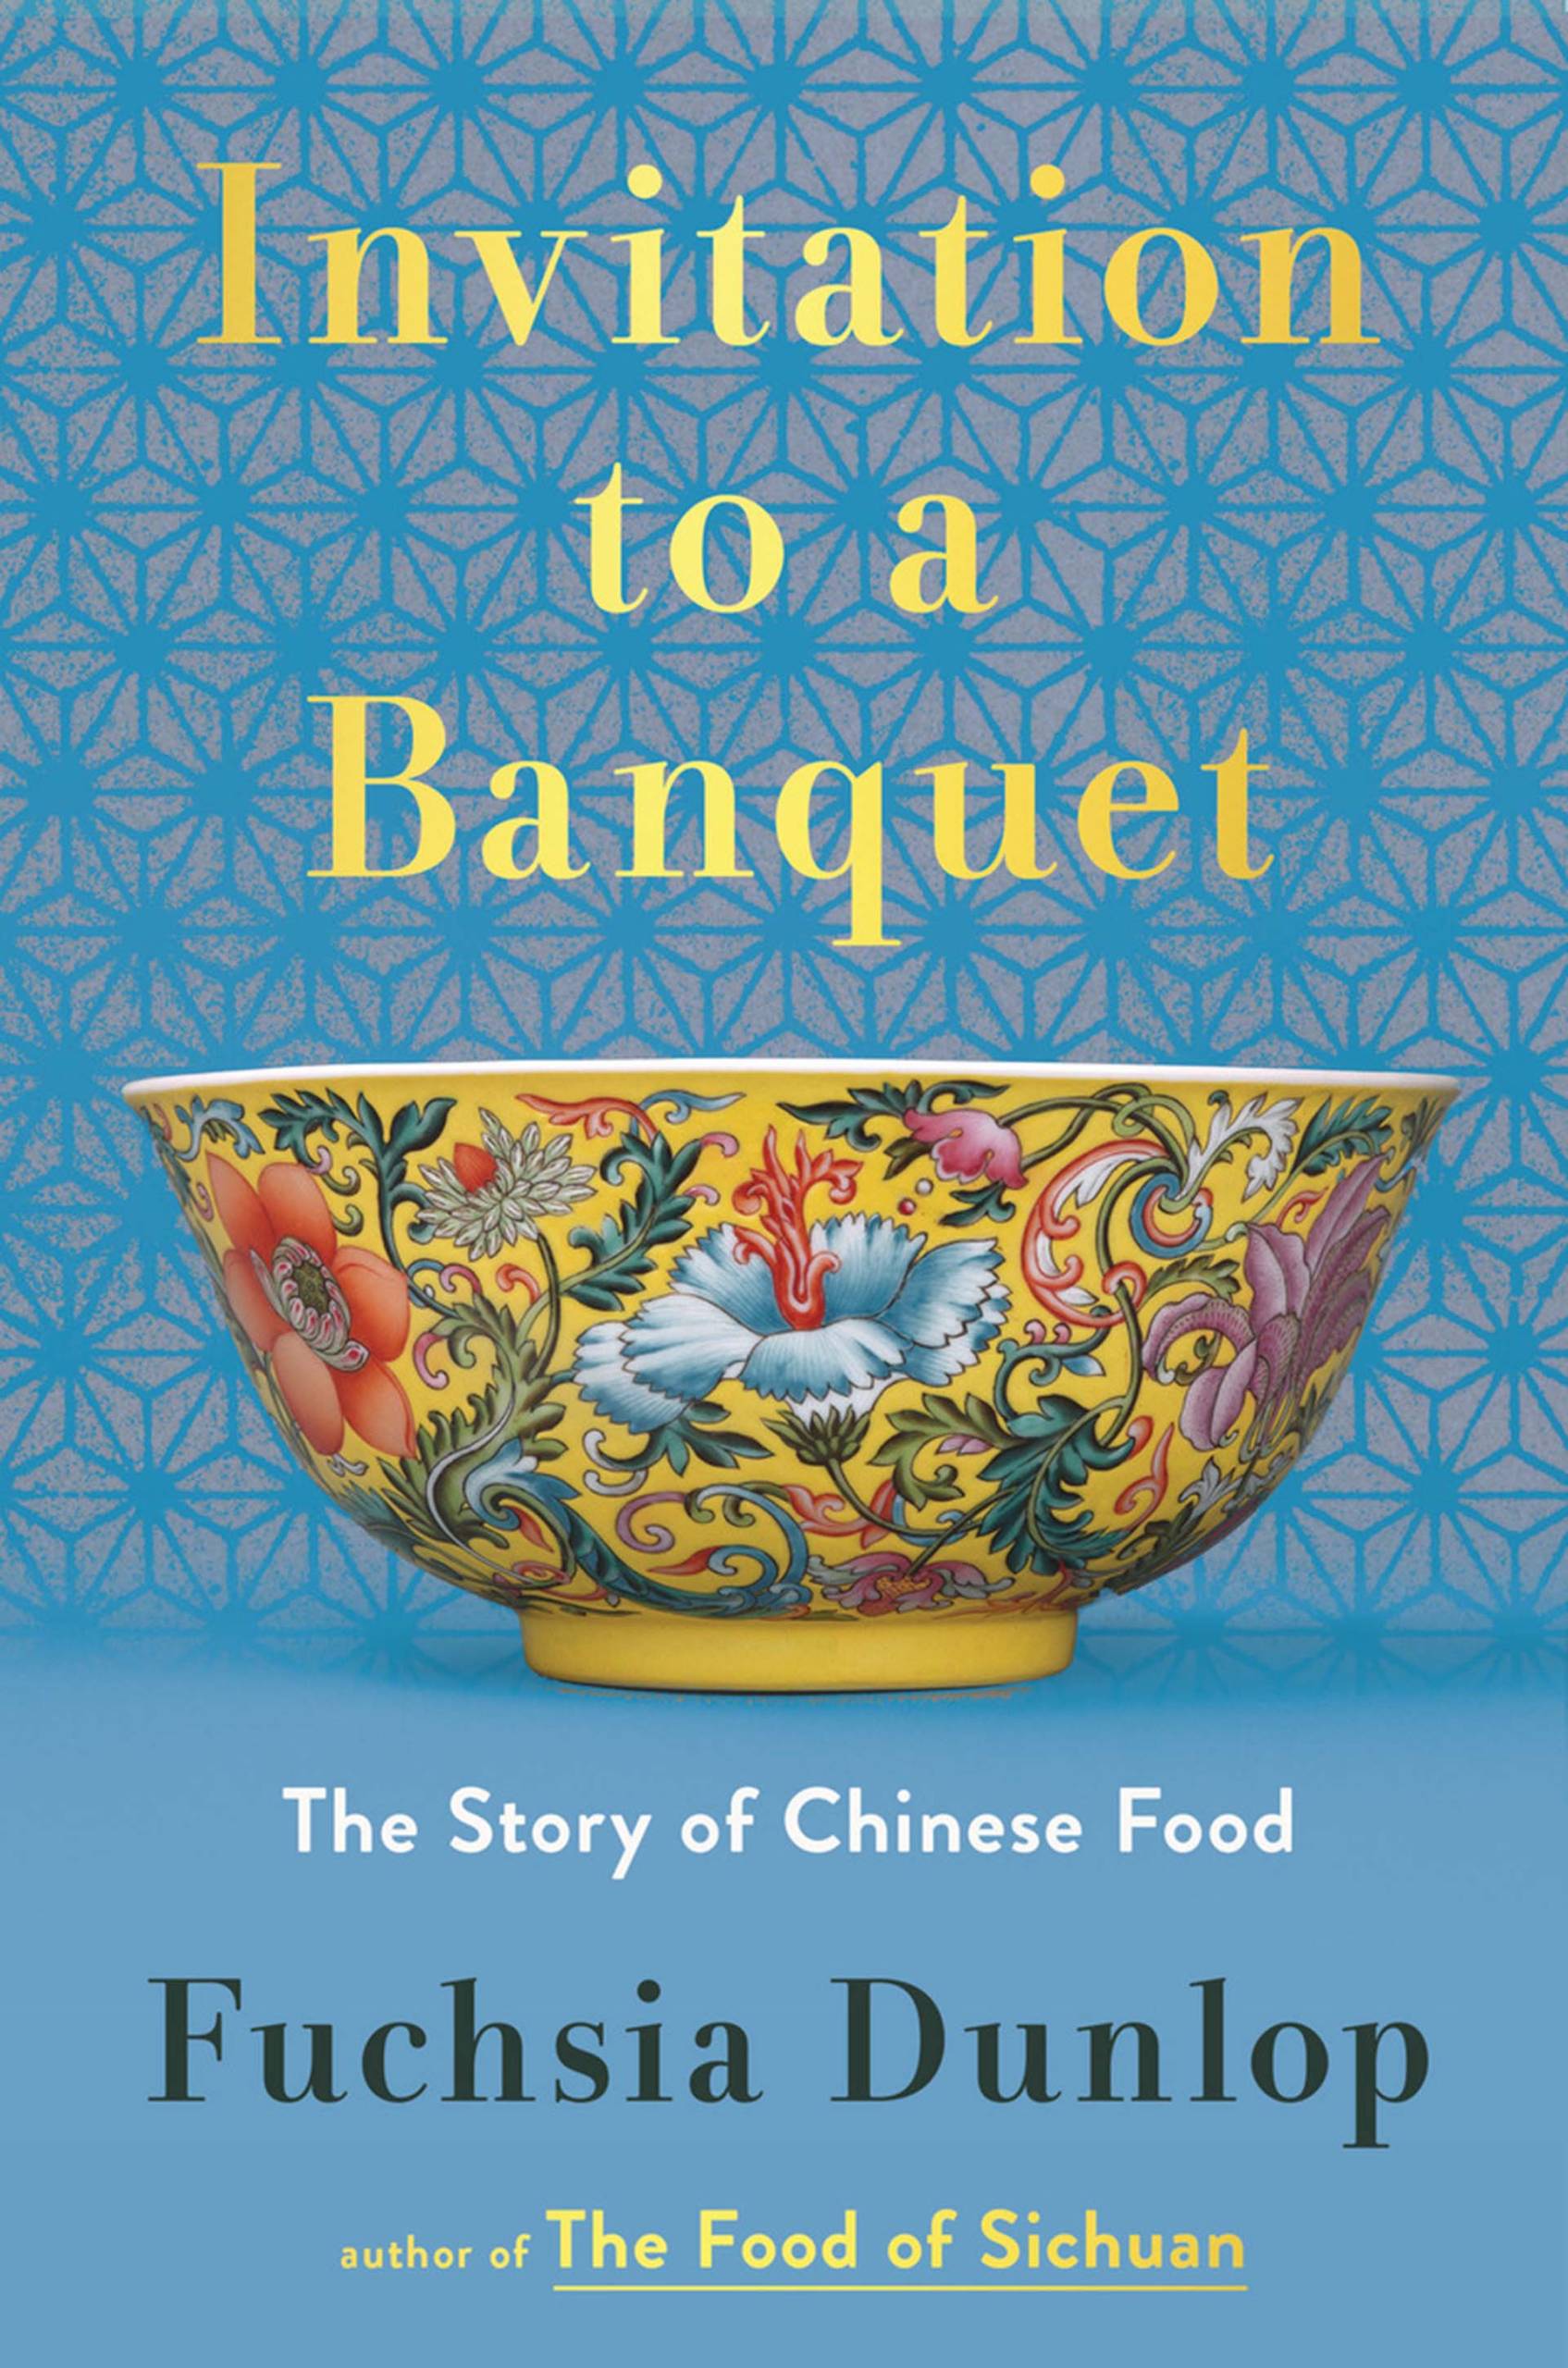 The book jacket for Fuchsia Dunlop's 'Invitation to a Banquet' depicts a colorful Chinese ceramic bowl against a light blue background.